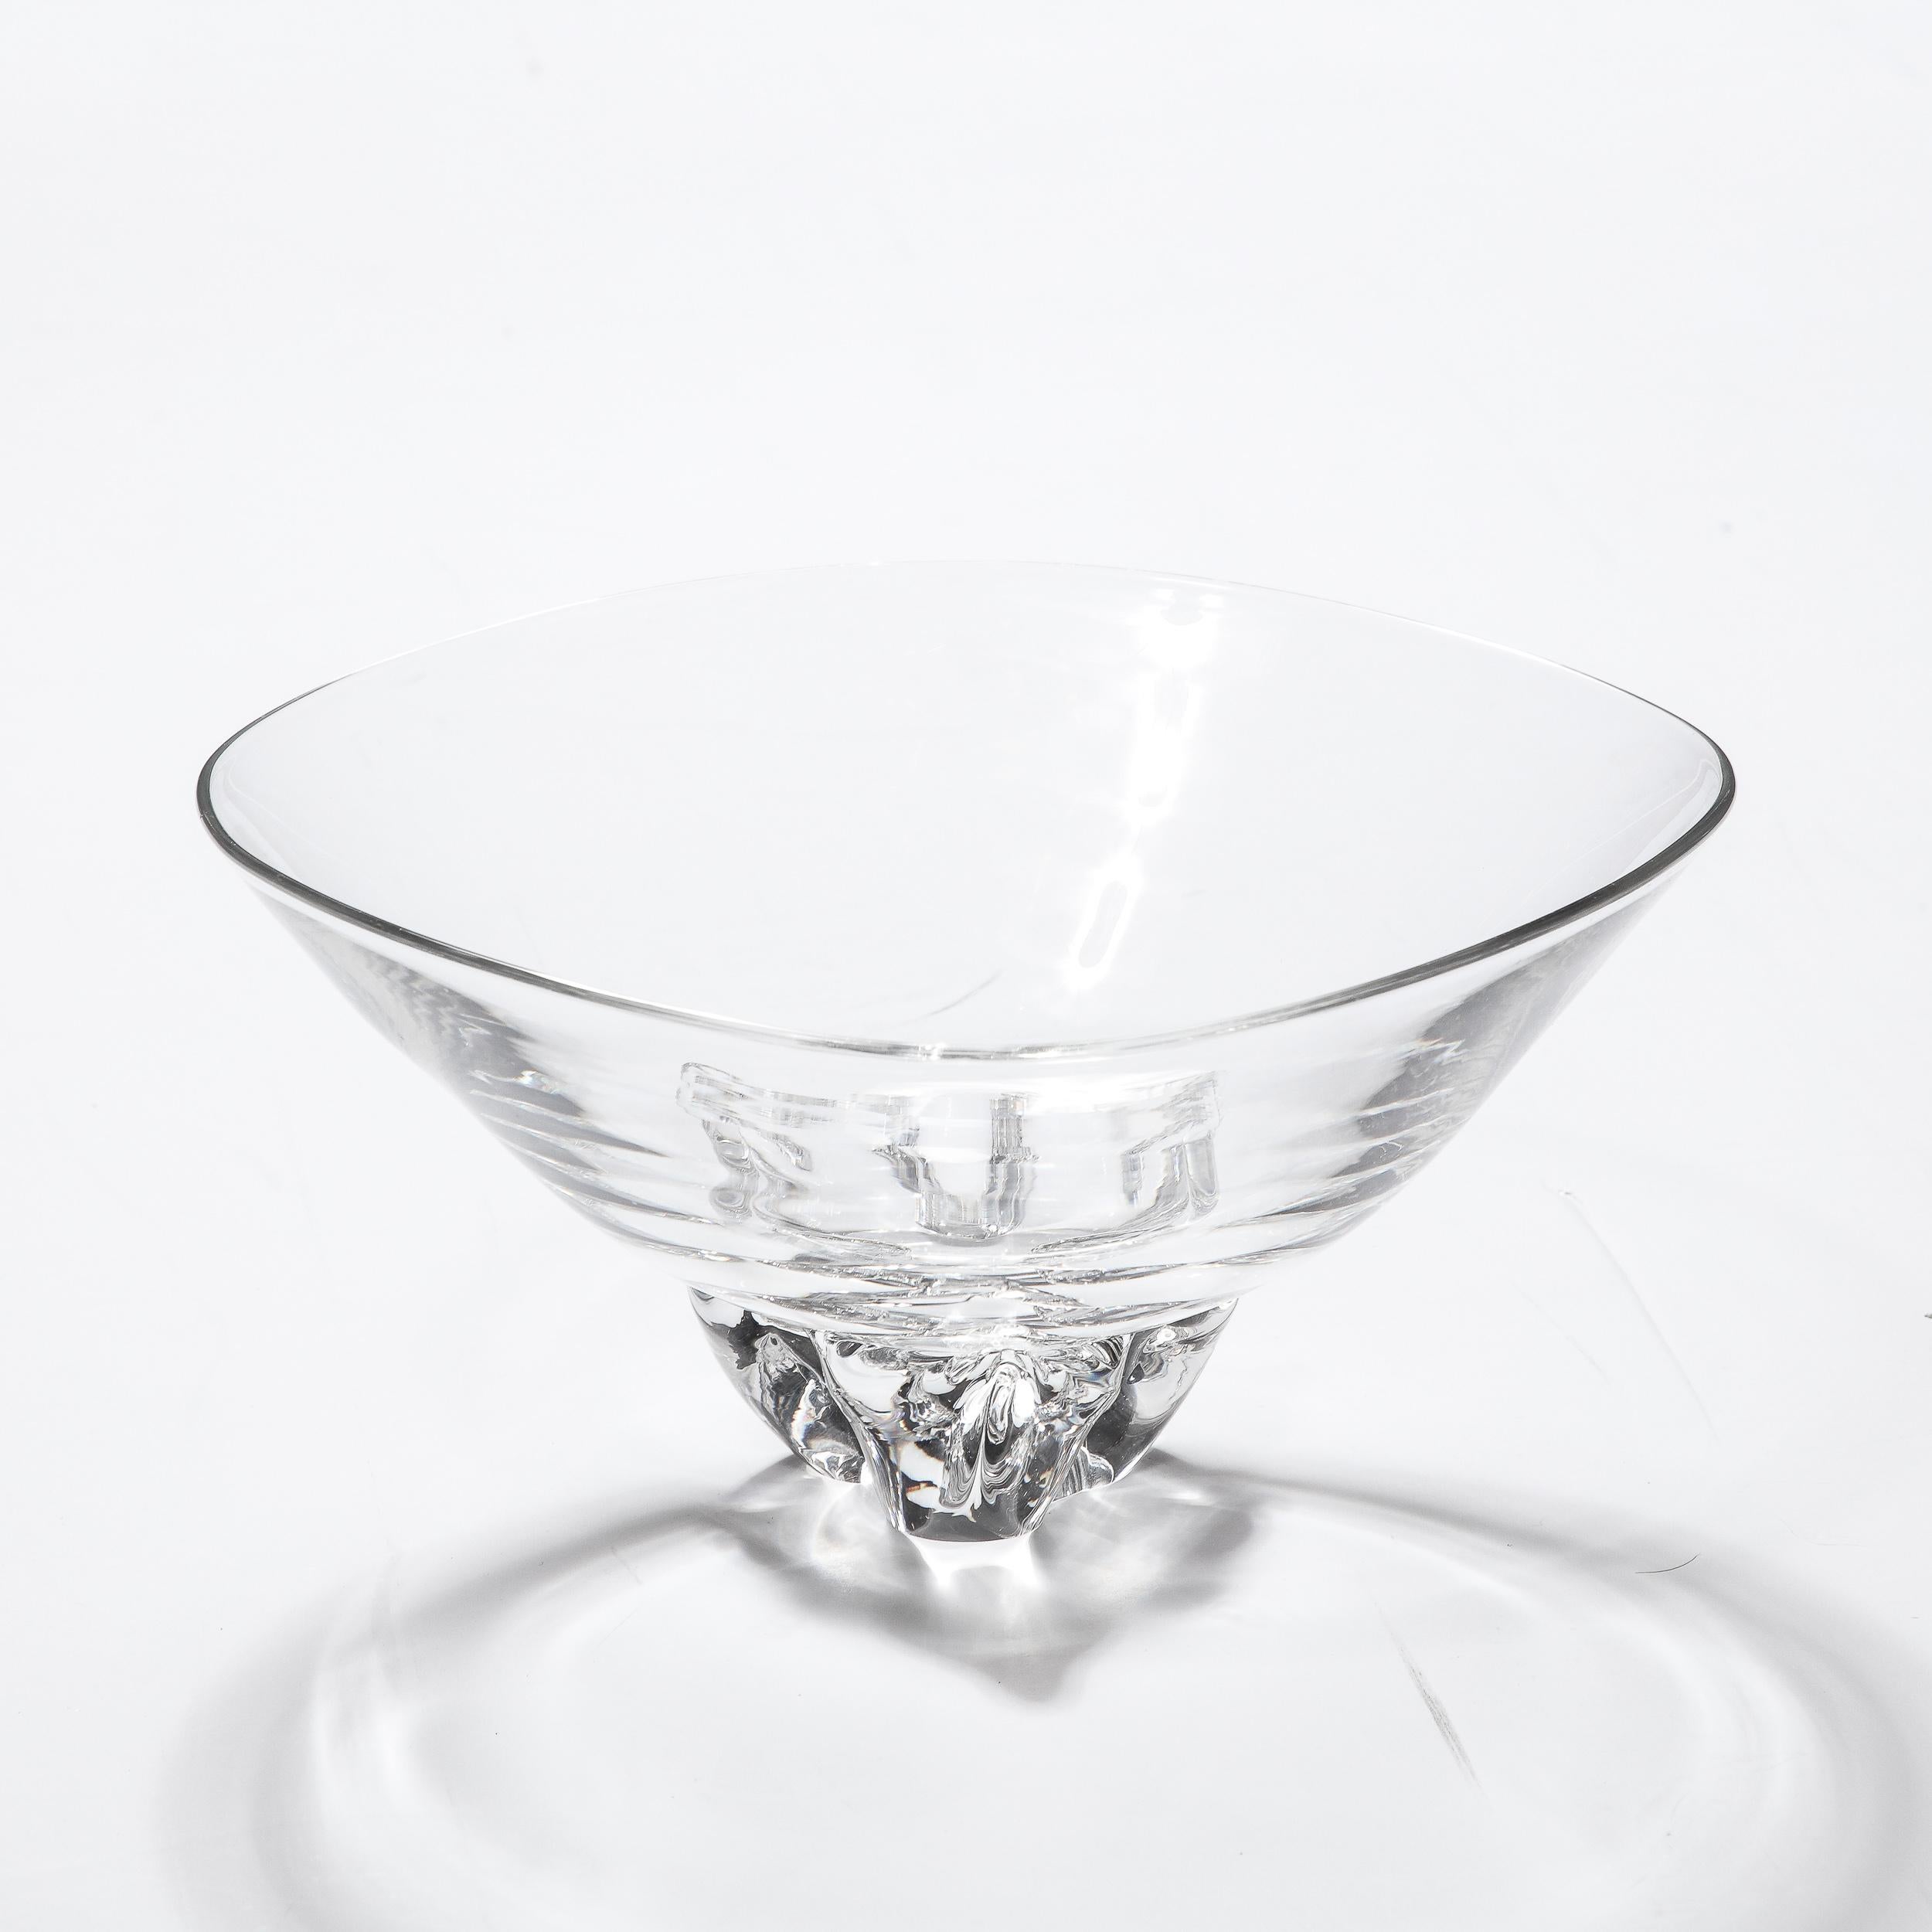 This Mid-Century Modernist Bowl in Hand-Blown Glass and Organic Sculptural Base is signed Steuben and origiantes from the United States, Circa 1960. This piece features a beautiful sculptural base which appears to undulate and fold into itself with